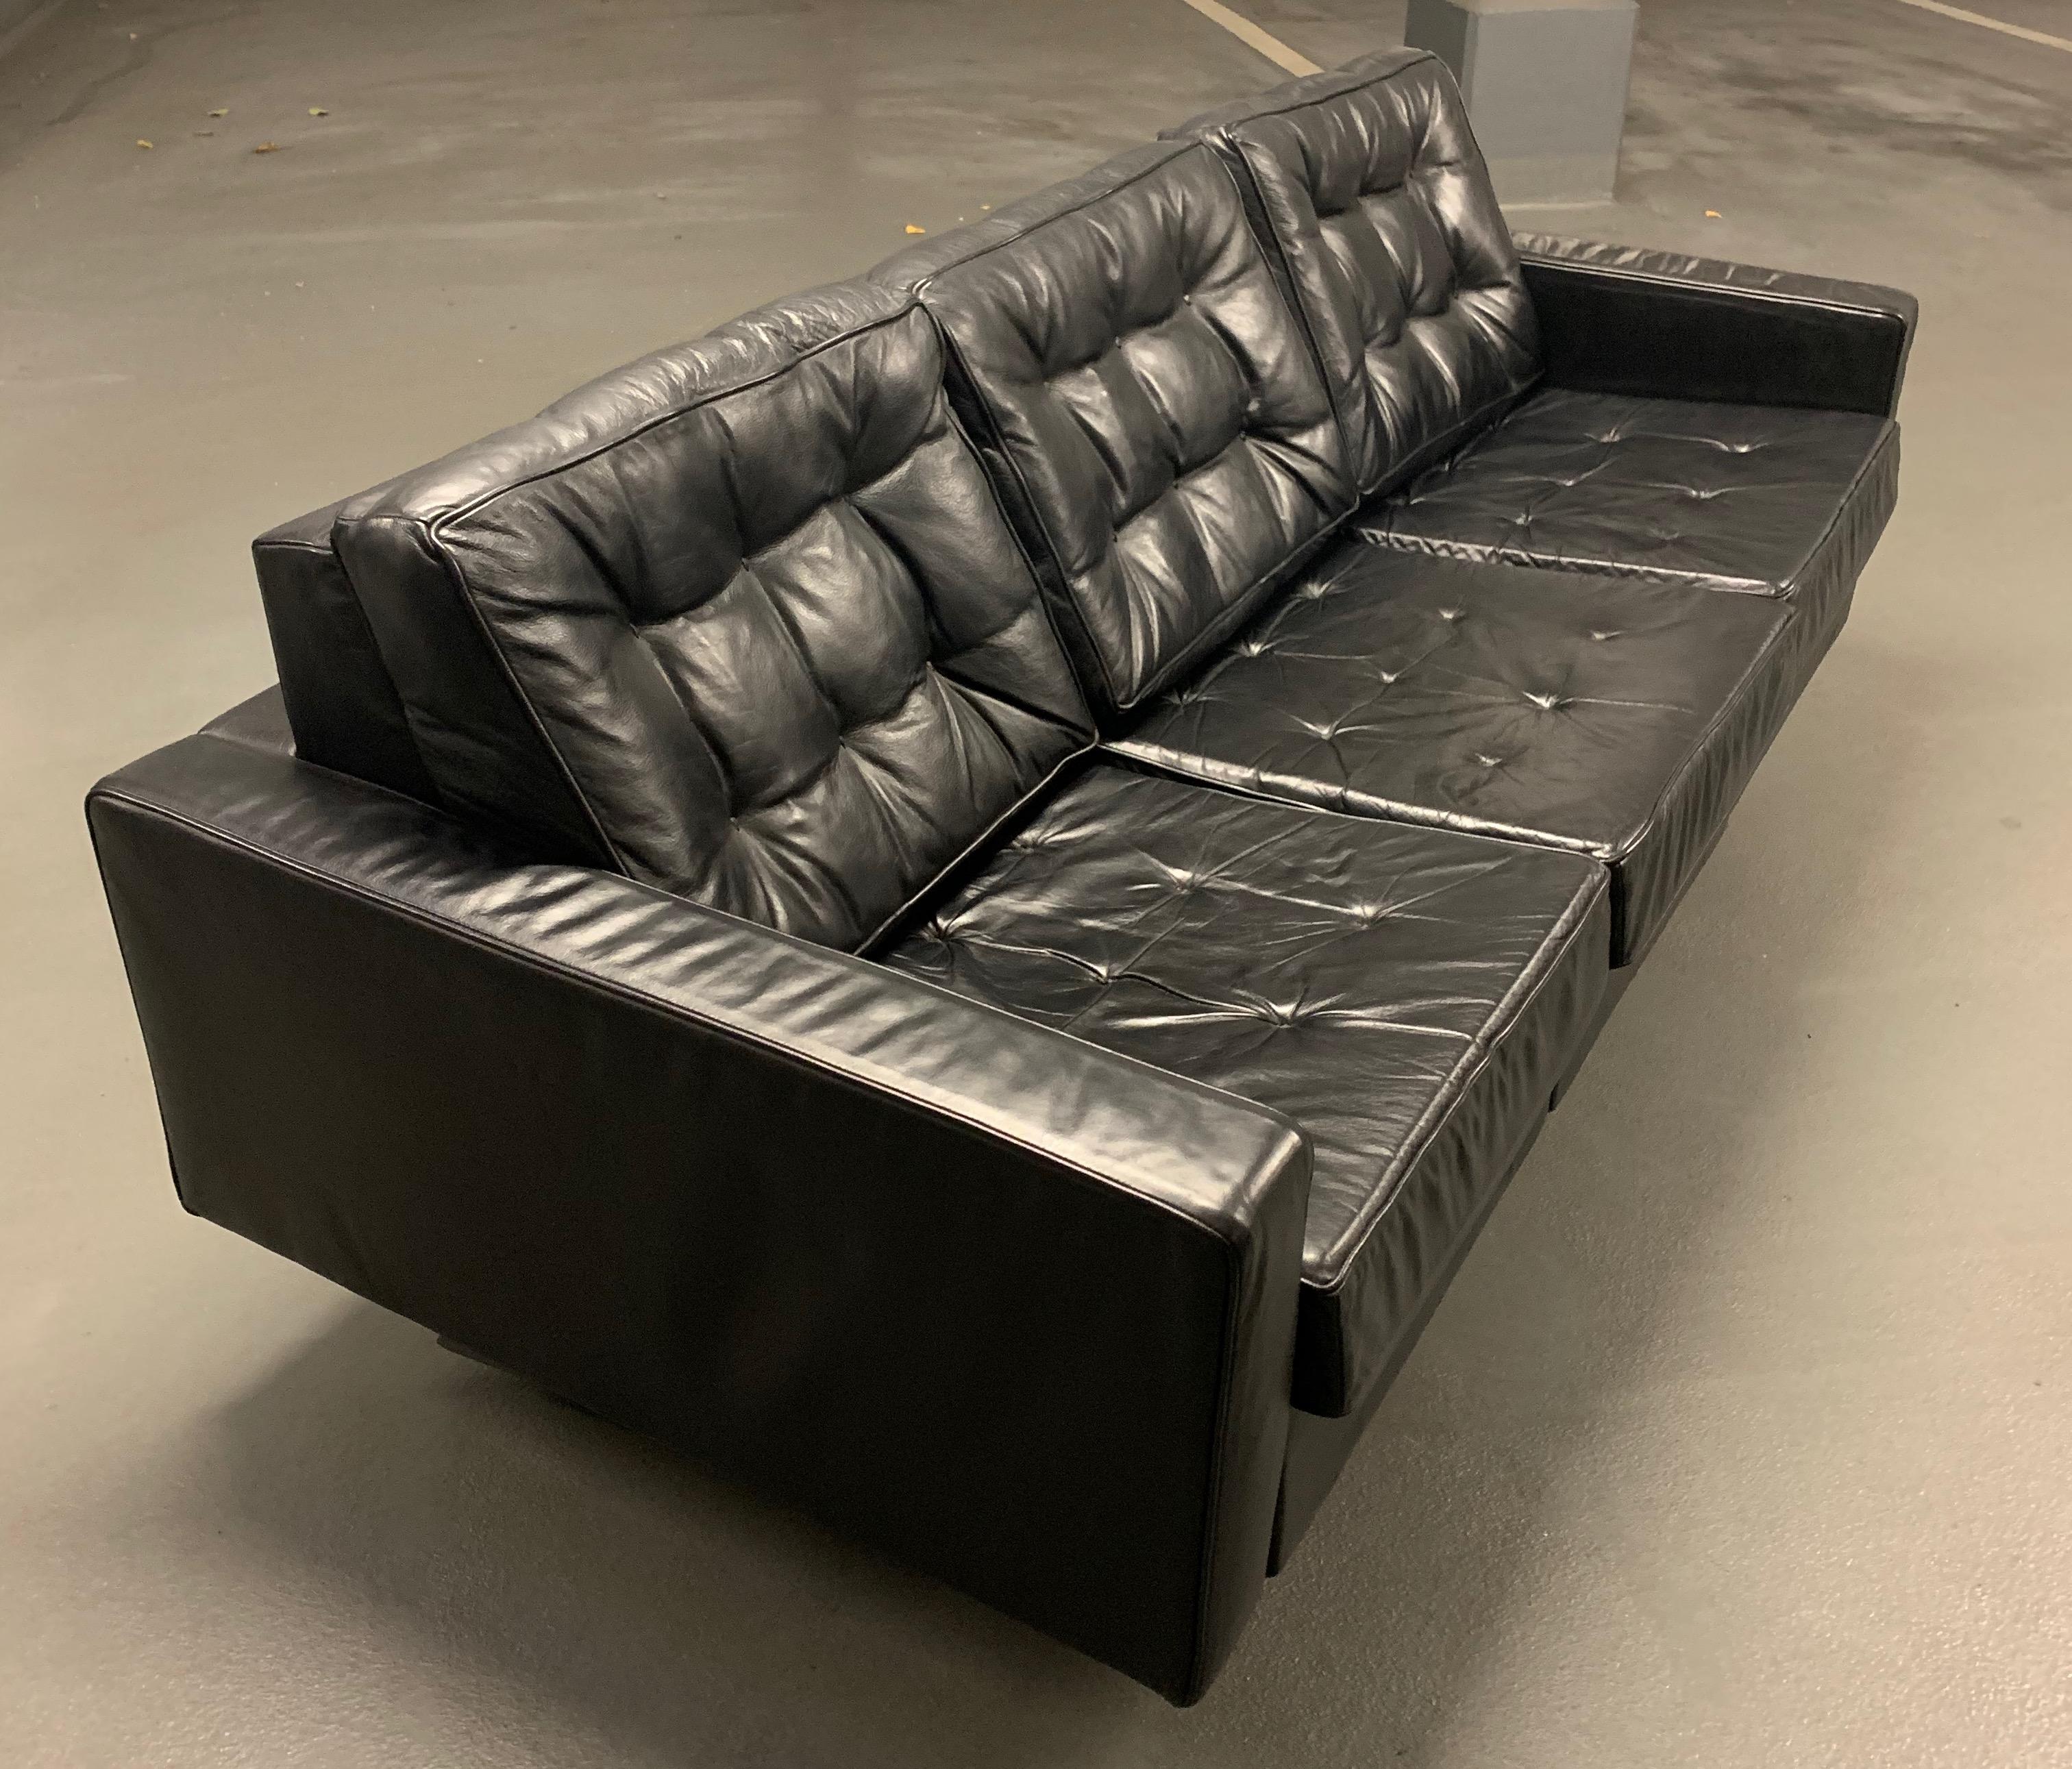 Best quality leather and three adjustable seats make this sofa to the most exquisite sofa De Sede ever produced. Down filled back cushions and a great mechanic to find your most relaxable position. In my opinion this sofa must have been the most